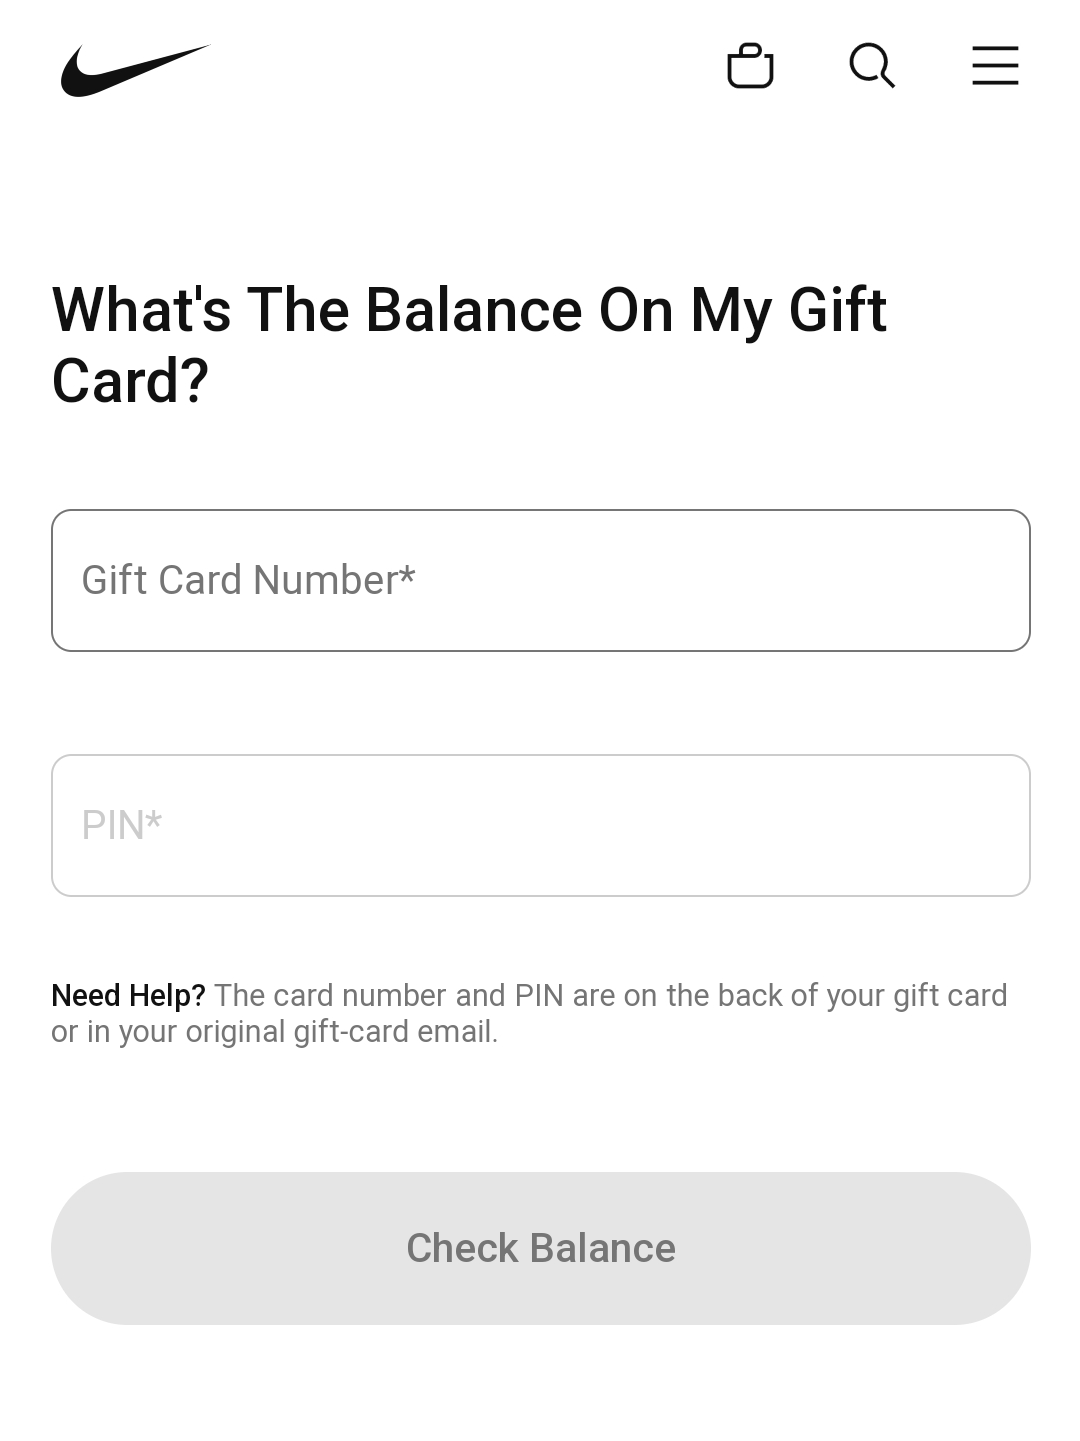 grijnzend Geboorte geven licht What Are The Nike Gift Card Errors And How Can They Be Fixed? - Nosh